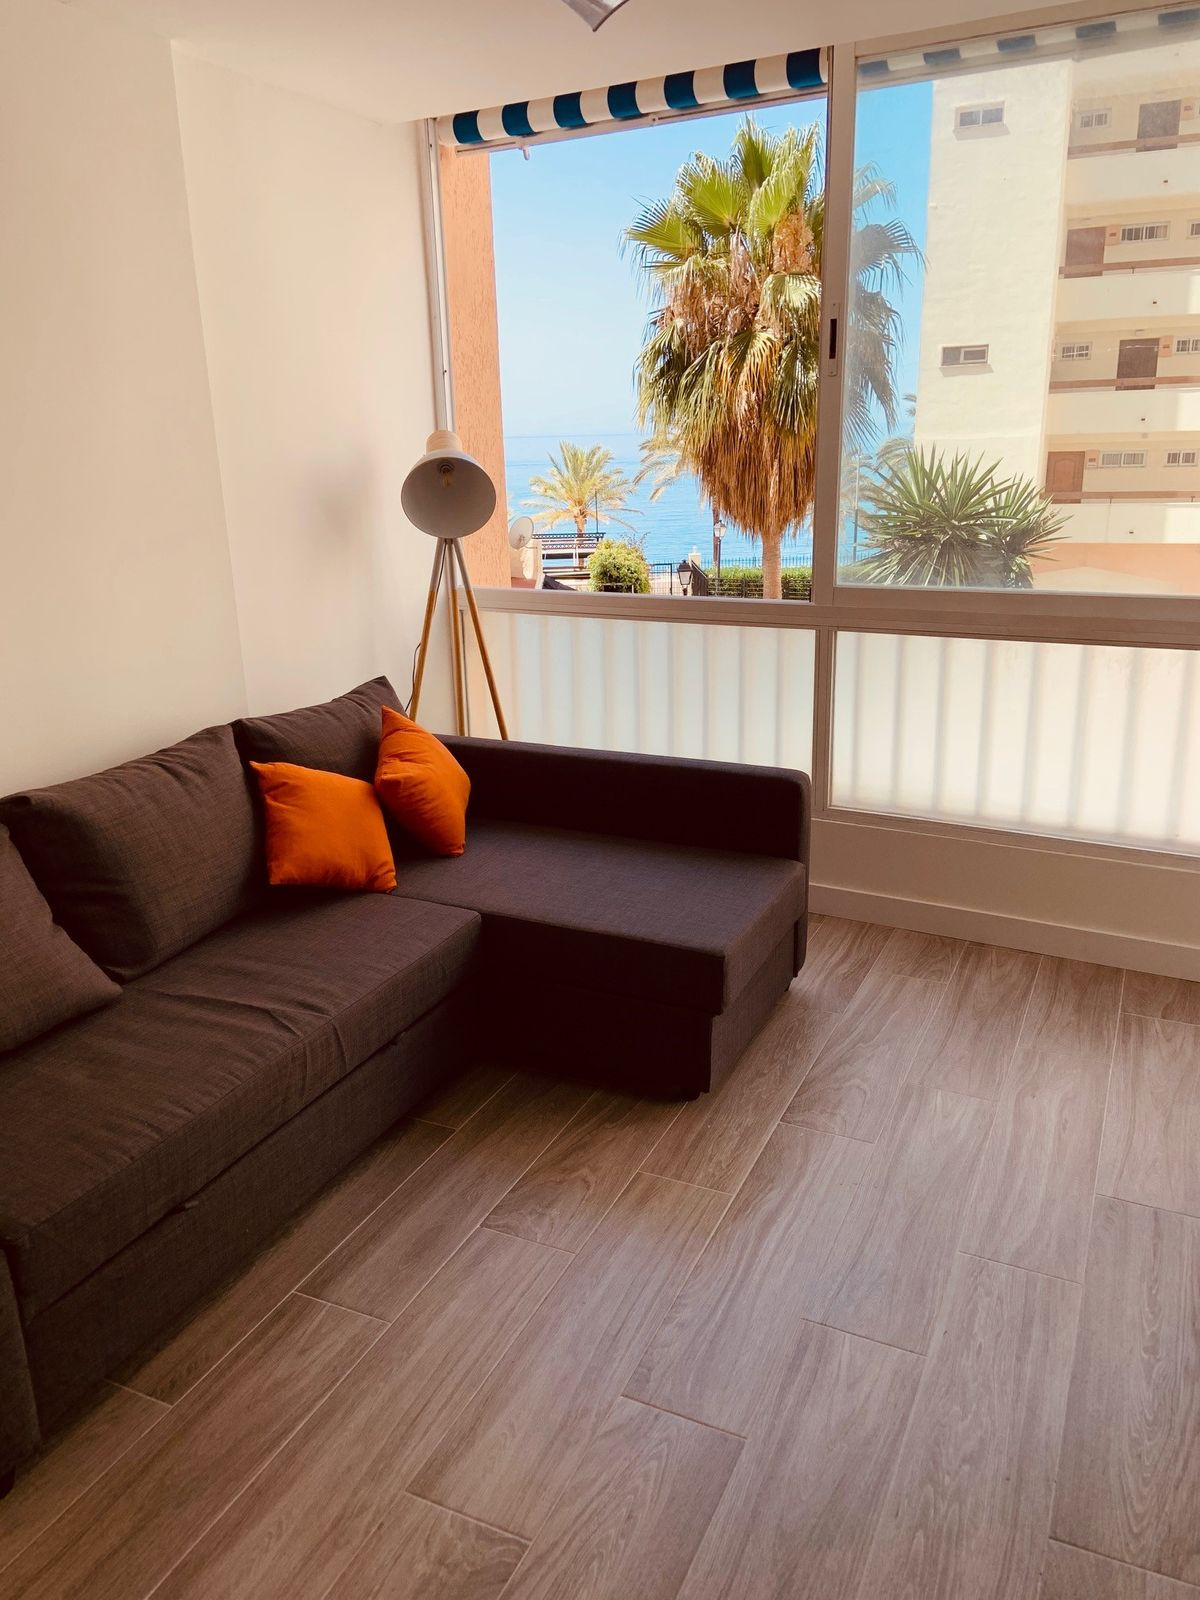 Ground Floor Apartment for sale in Marbella R4645039